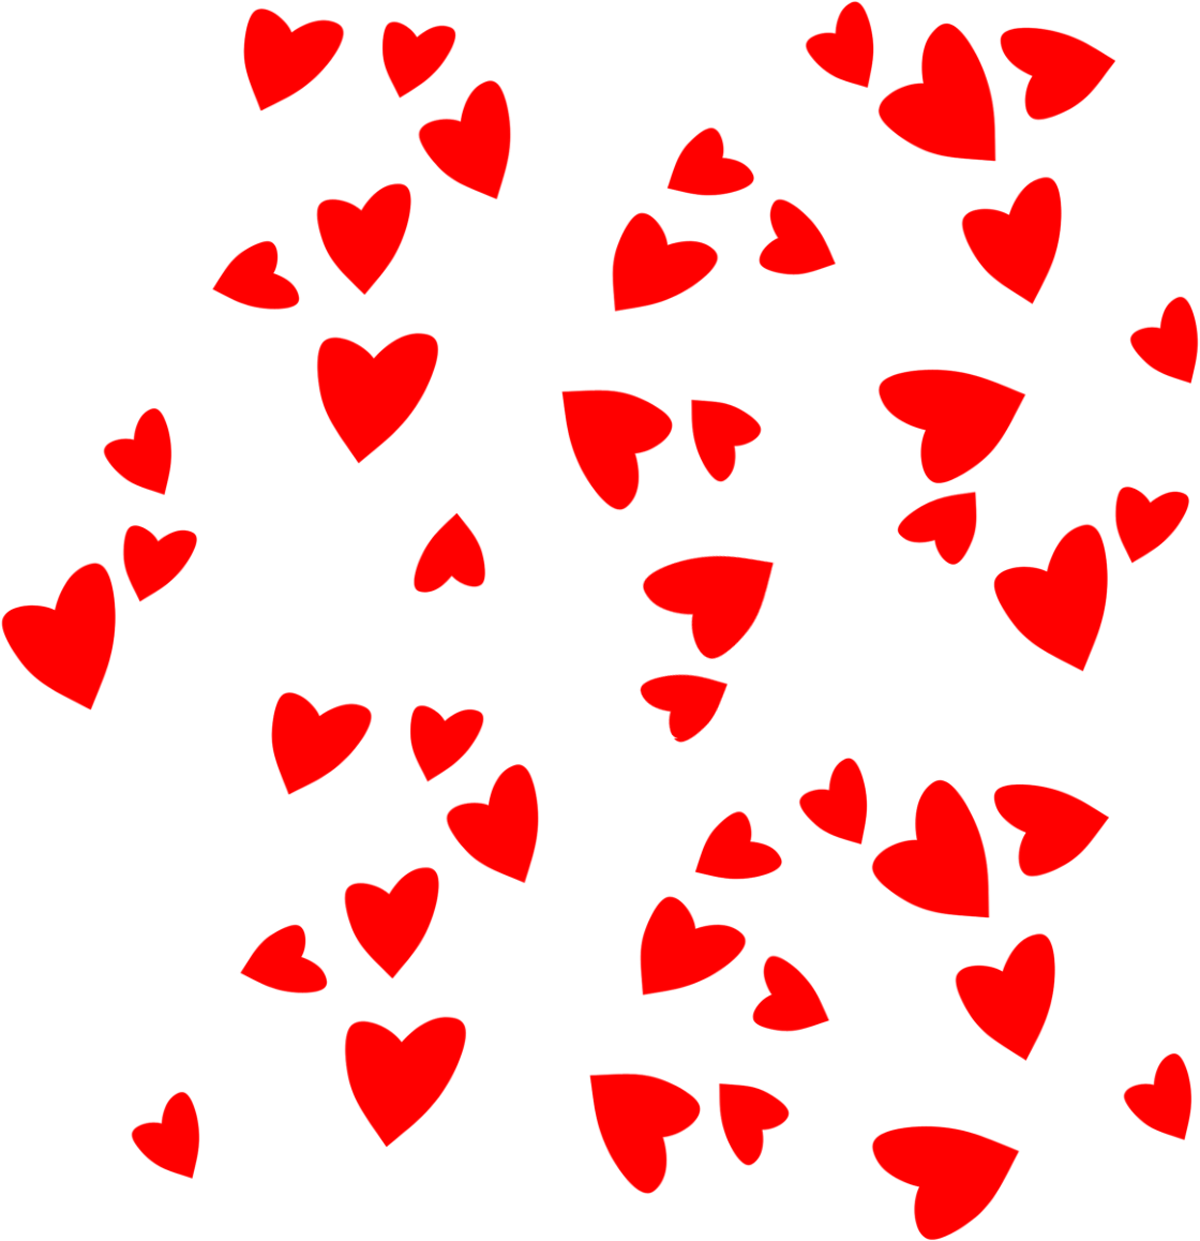 Small Red Heart Clipart - ClipArt Best